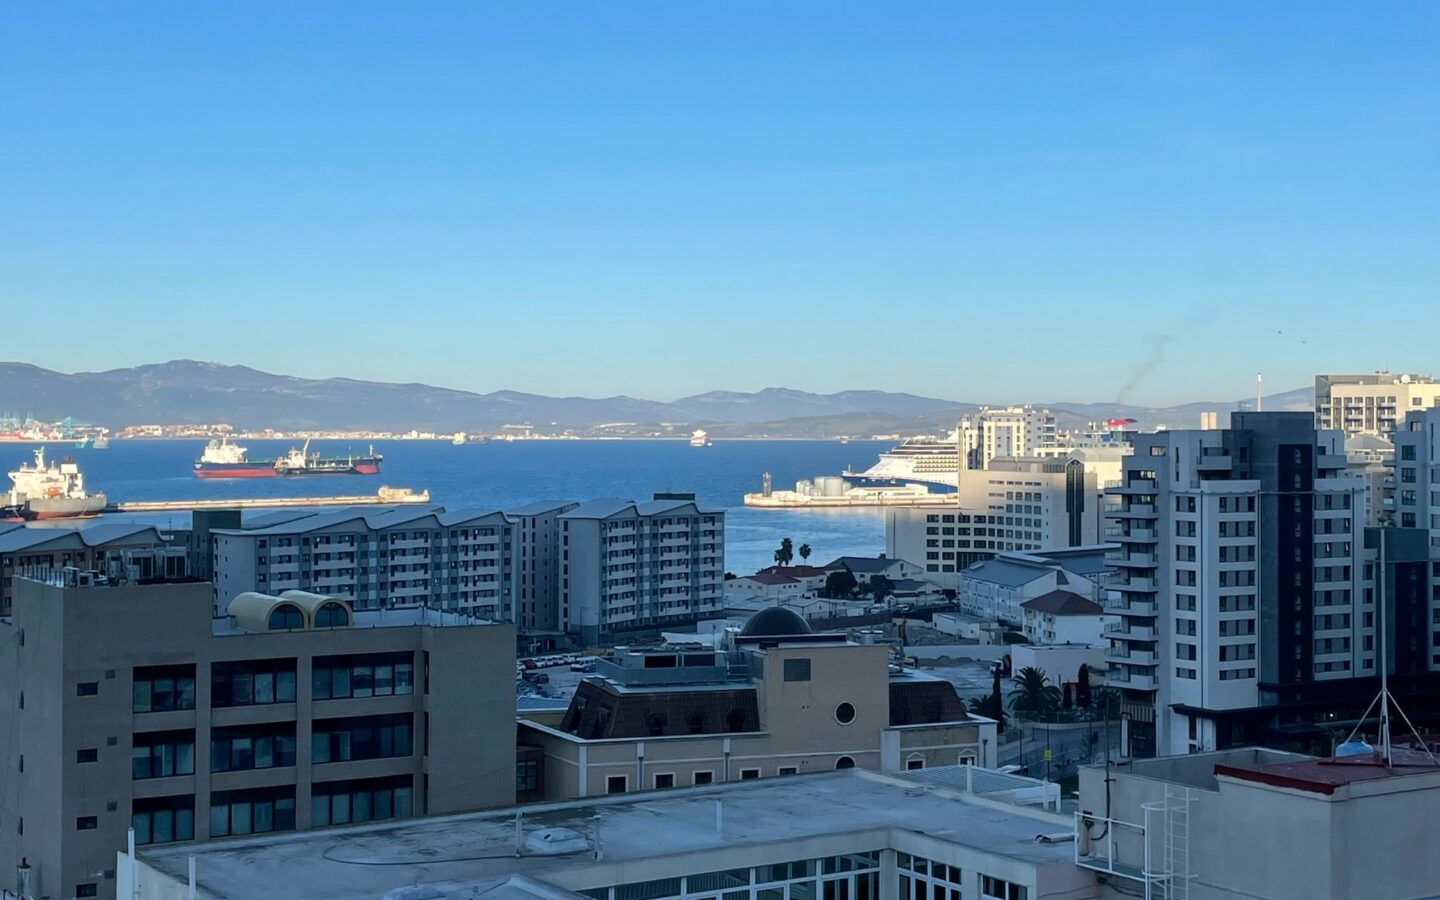 A view across apartments and buildings to the port of Gibraltar where a cruise ship is visible in the distance. This page also shows a video showing scenes from working life at sea. There are large ships at sea viewed from an aircraft or drone, an overhead view of a port, fishermen pulling in a large net, close up of a ship's controls, a close up of a man working on board ship wearing a blue hard hat